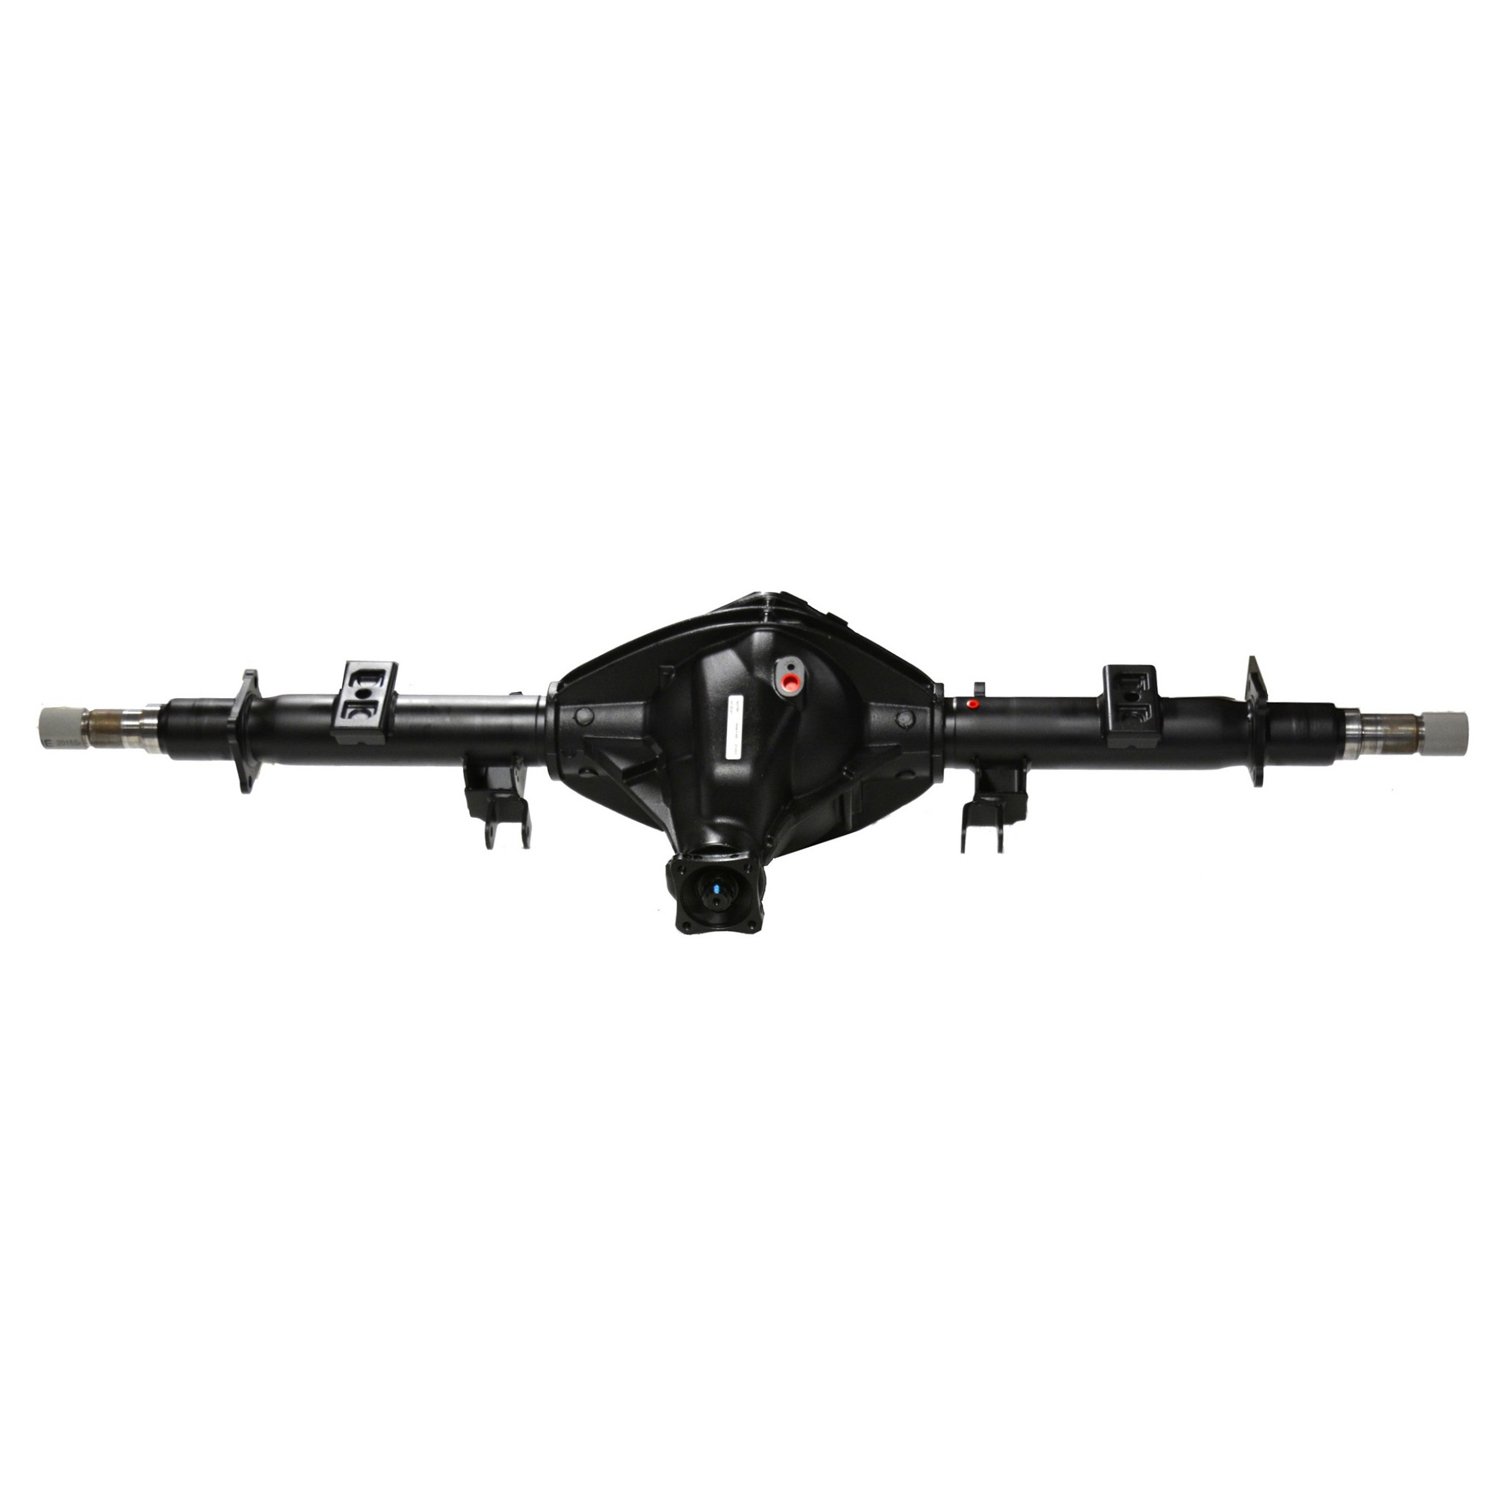 Remanufactured AAM 11.5" AXLE ASSY '07-'08 CHY RAM DRW 3500 CAB CHASSIS, 3.73, 2WD & 4WD, POSI